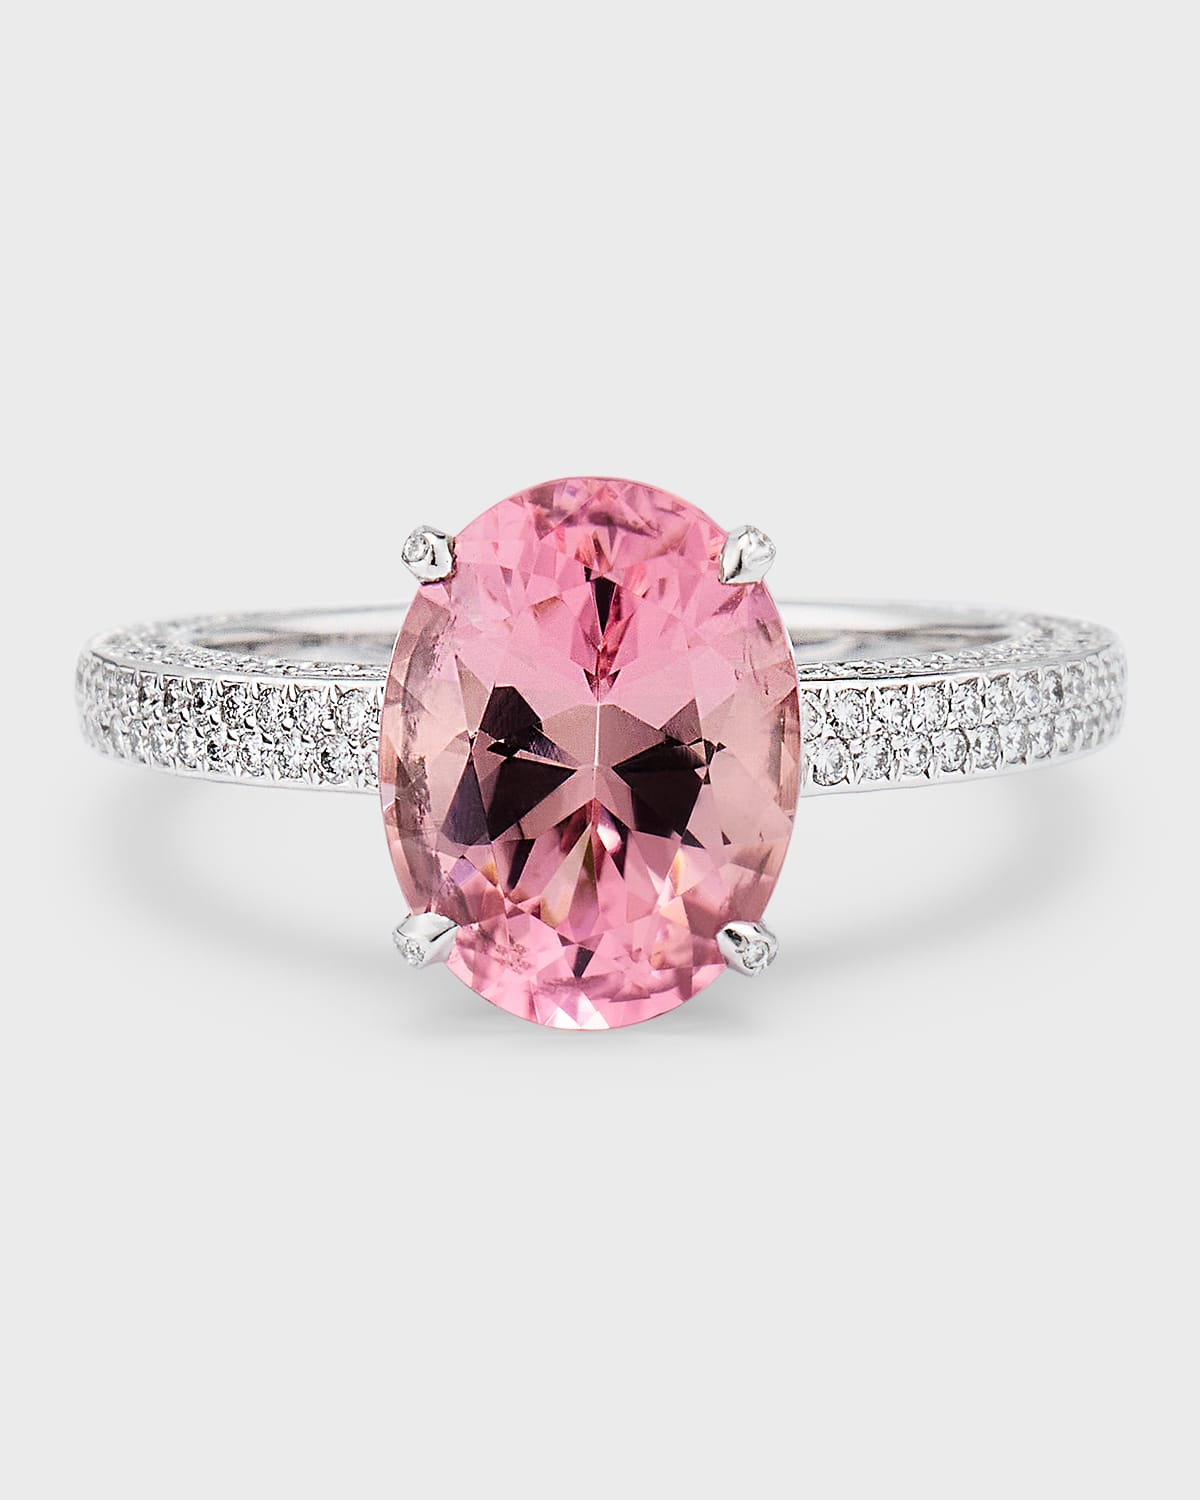 High Jewelry 18K White Gold One-of-a-Kind Pink Tourmaline Solitaire Ring